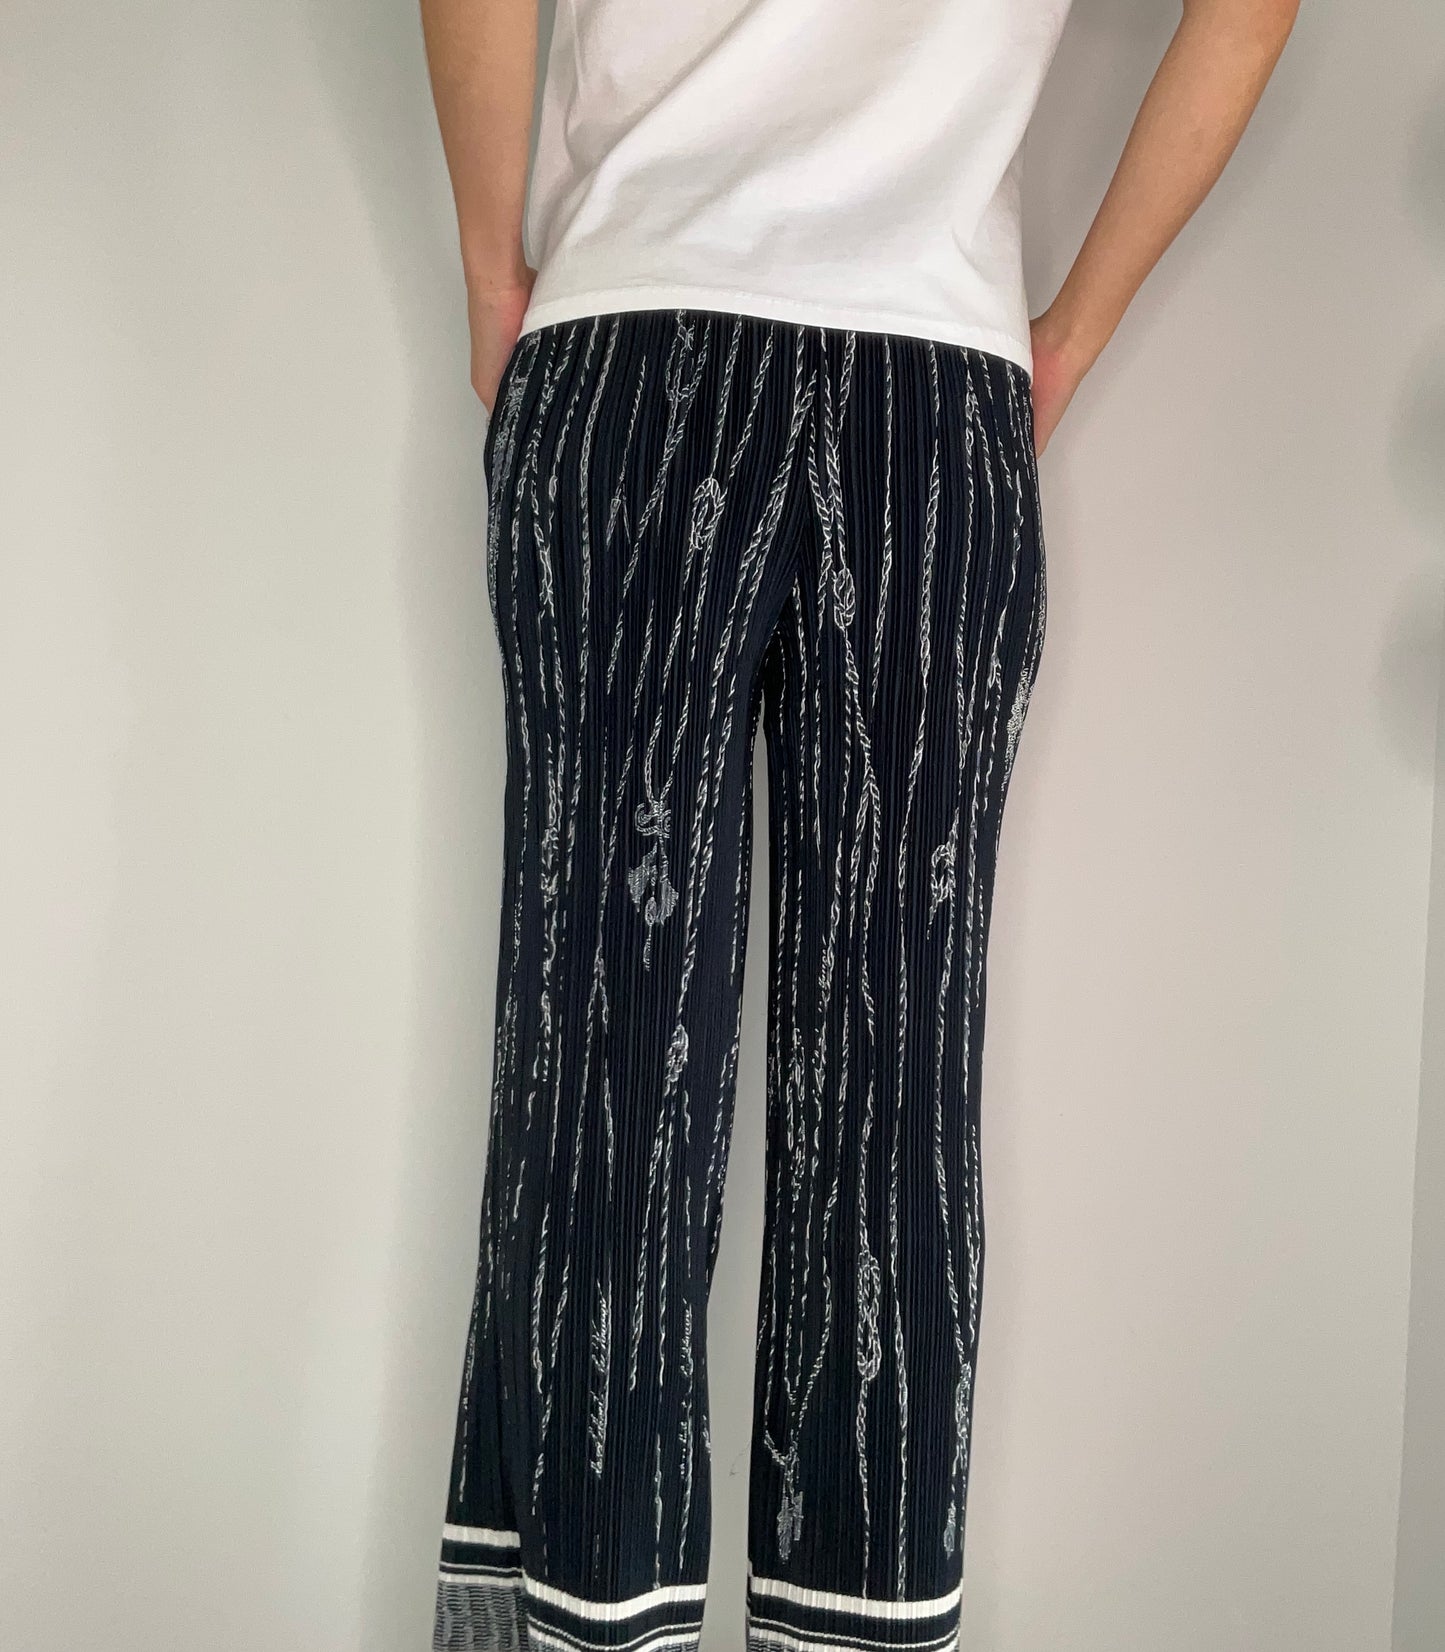 NAVY CINCHED RELAXED PANT